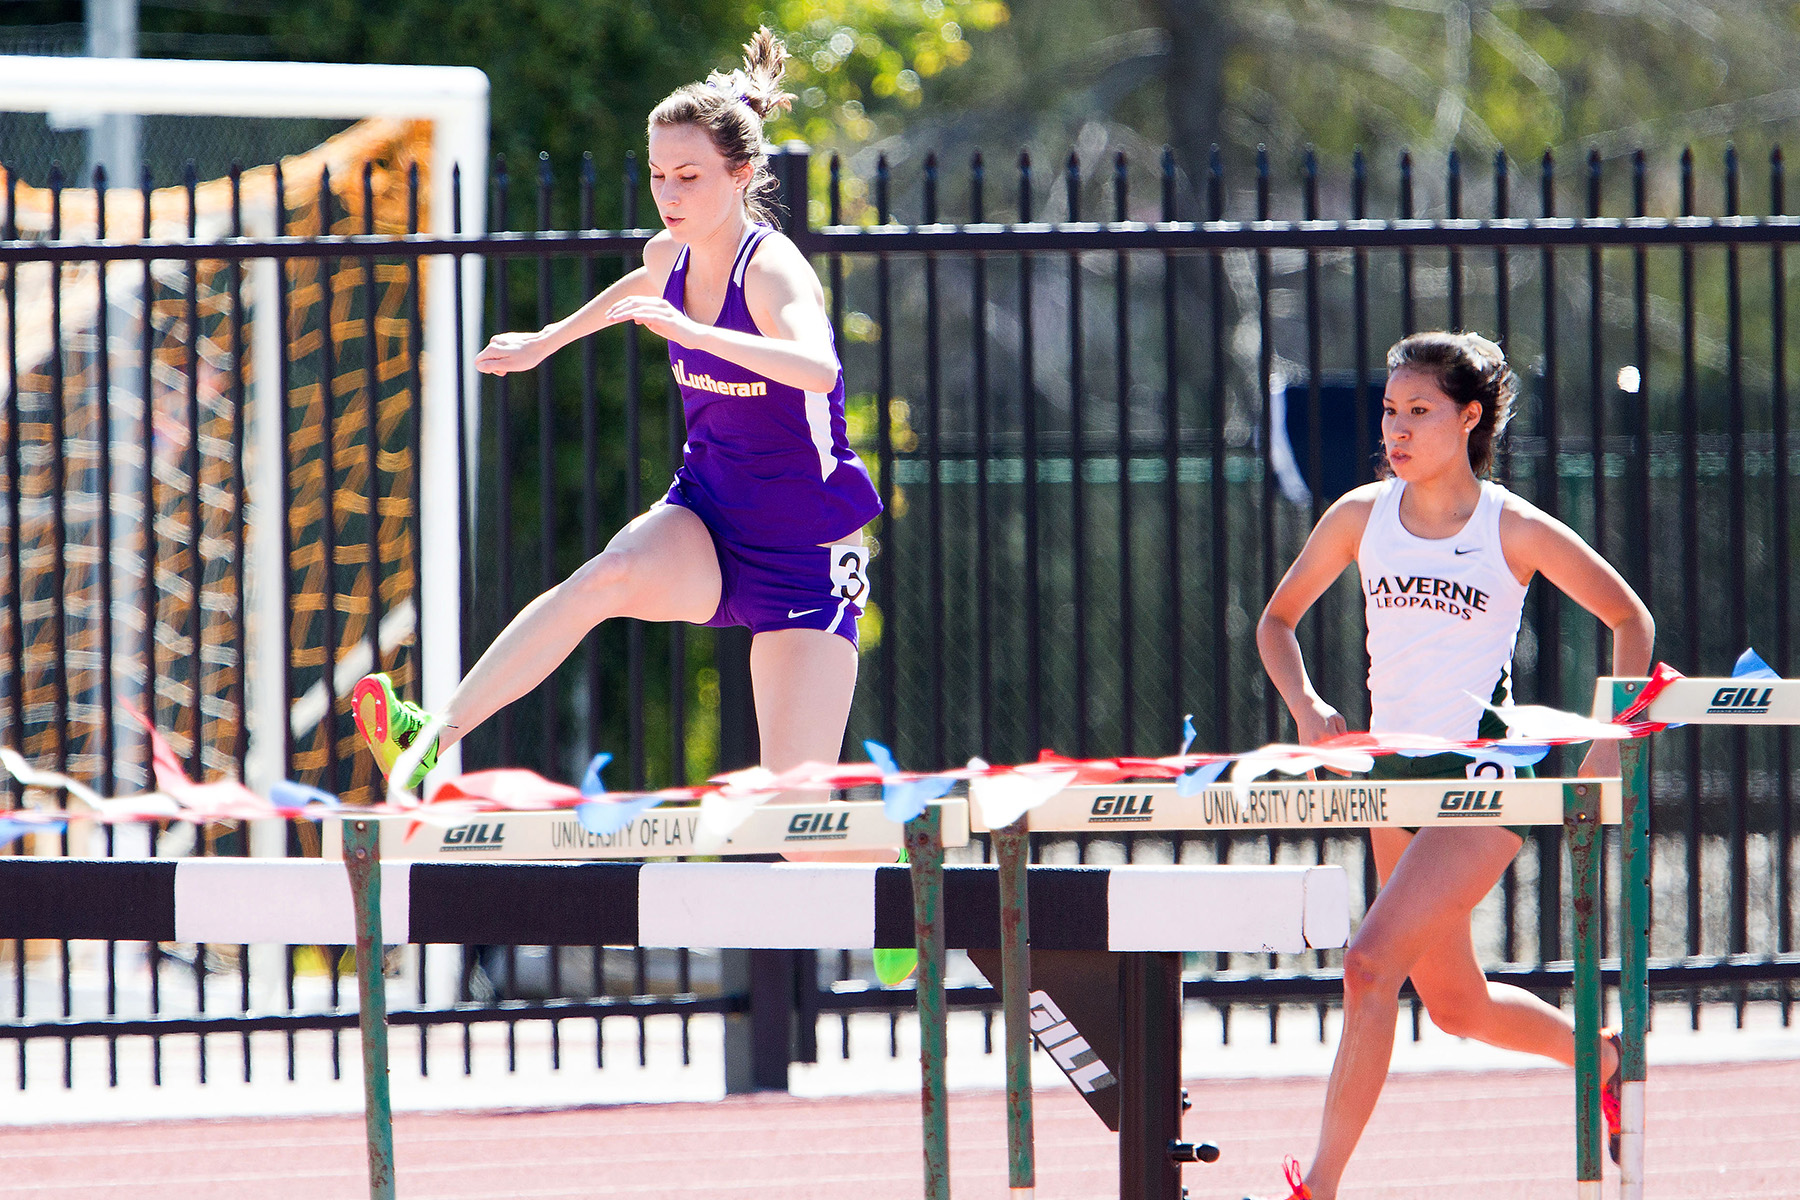 Regals Compete at Oxy Distance Carnival California Lutheran University